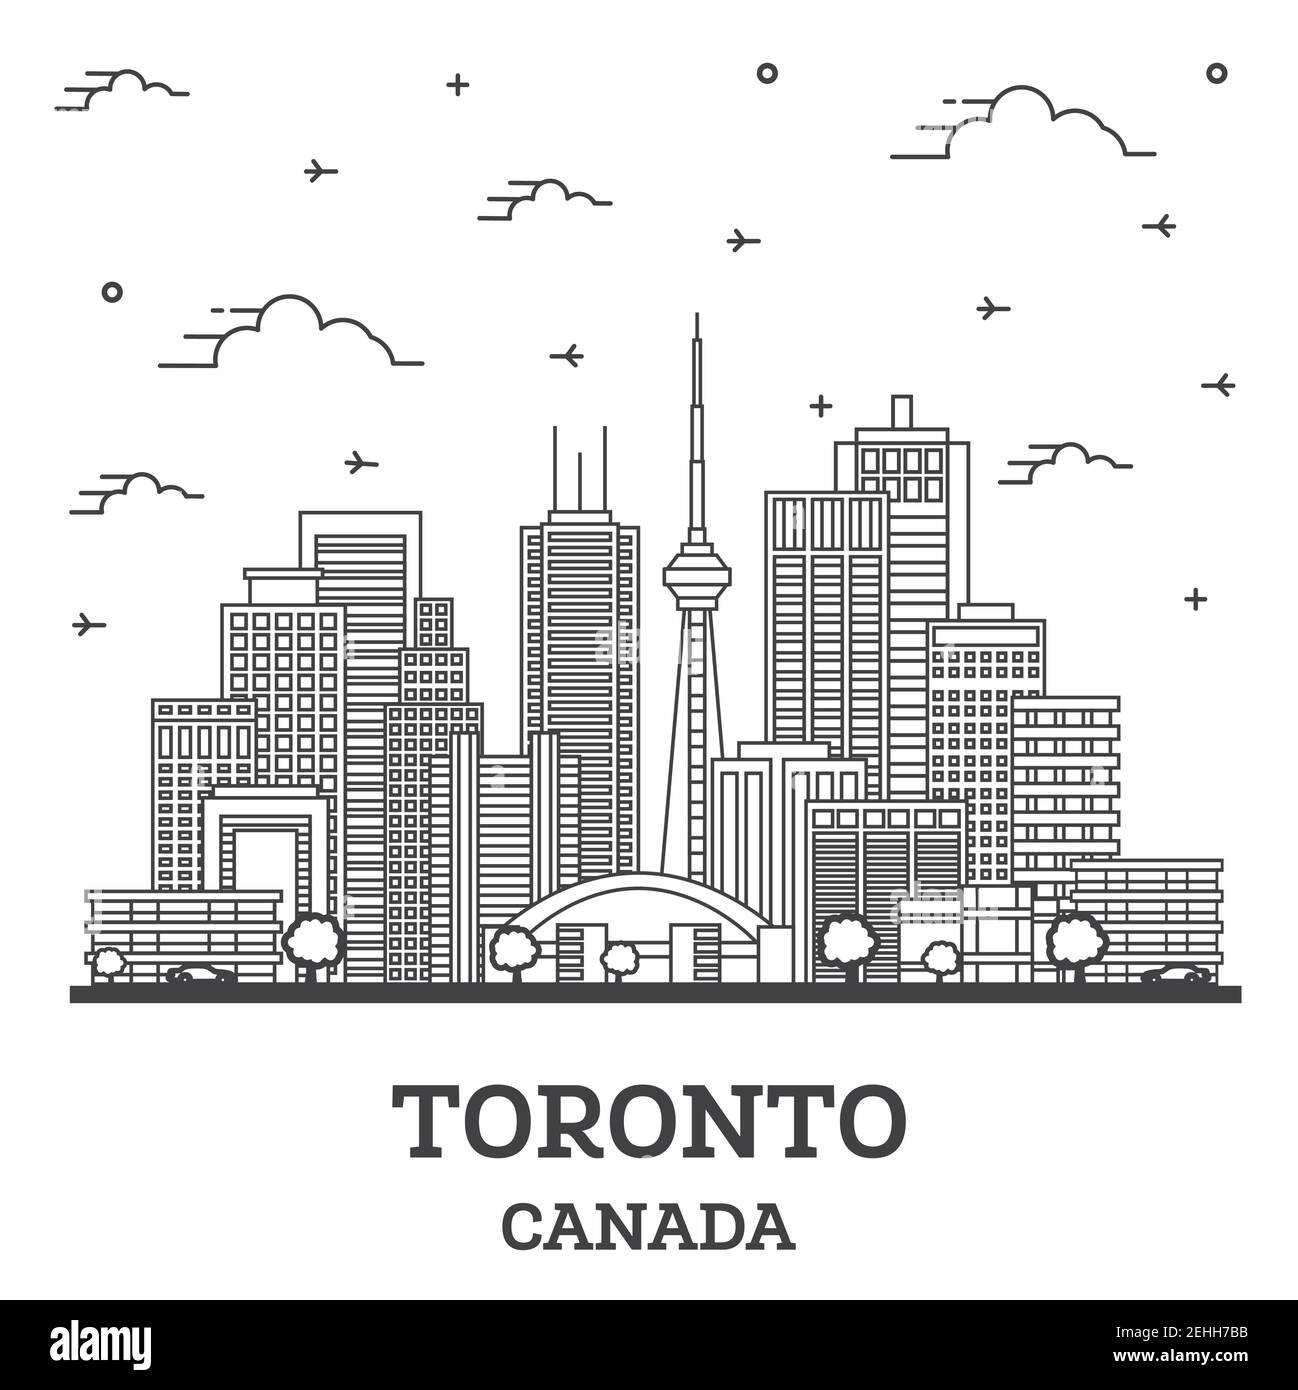 Outline Toronto Canada City Skyline with Modern Buildings Isolated on White. Vector Illustration. Toronto Cityscape with Landmarks. Stock Vector